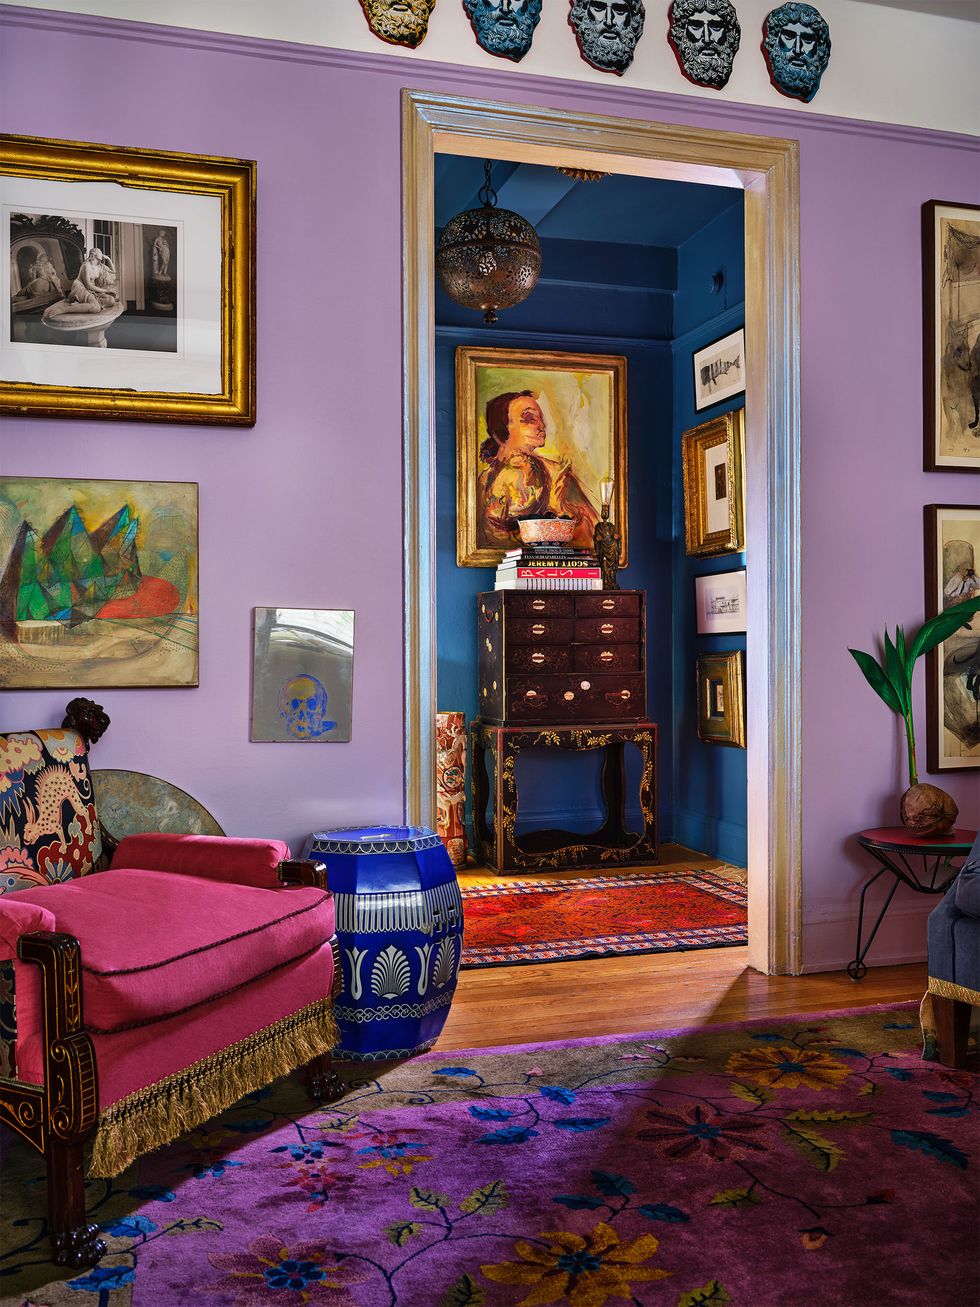 Living area with purple printed rug, lilac walls, magenta Victorian chairs, and blue antique side tables, all in the entrance with deep blue walls, antique Japanese cabinets, and wall paintings. The view too